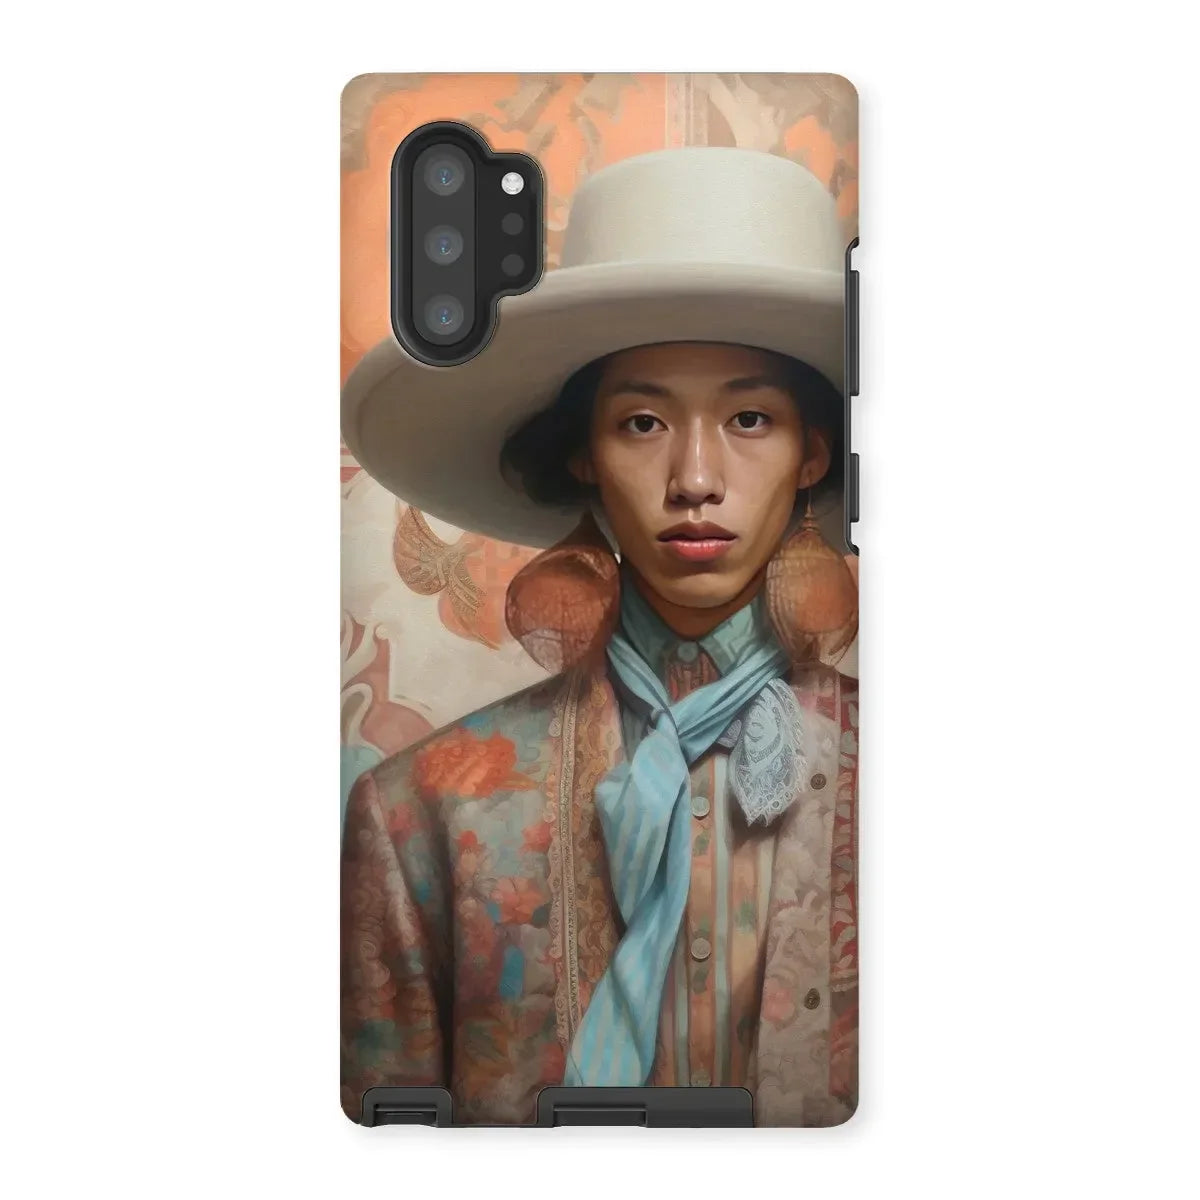 Iyaan - Gay Malay Asian Cowboy Aesthetic Art Phone Case - Samsung Galaxy Note 10p / Matte - Mobile Phone Cases